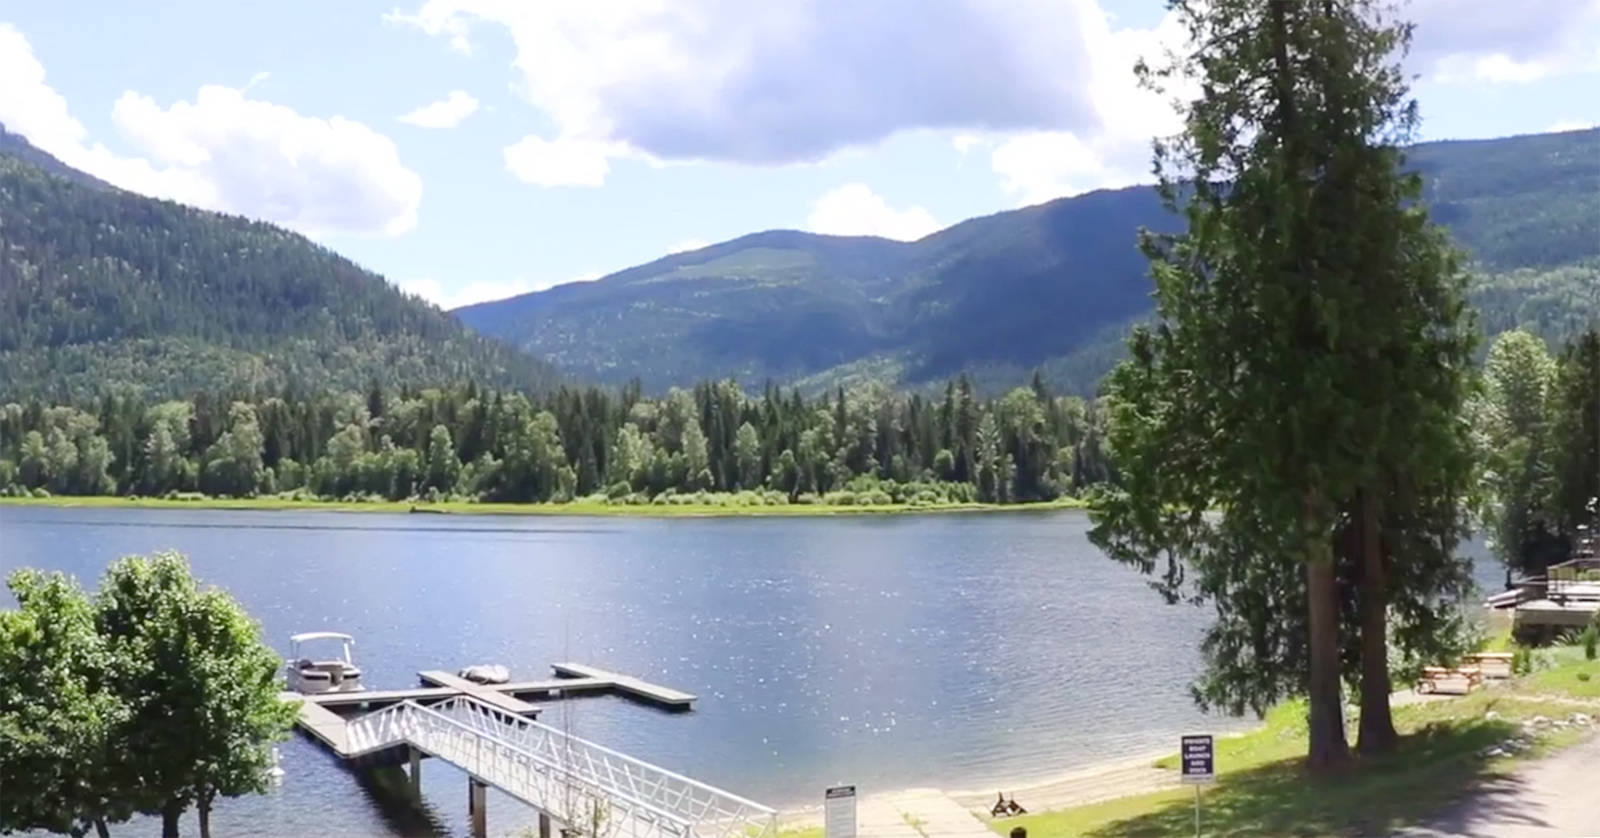 Located less than an hour east of Vernon, Sugar Lake is a year-round vacation destination ideal for both long-weekends and extended escapes.